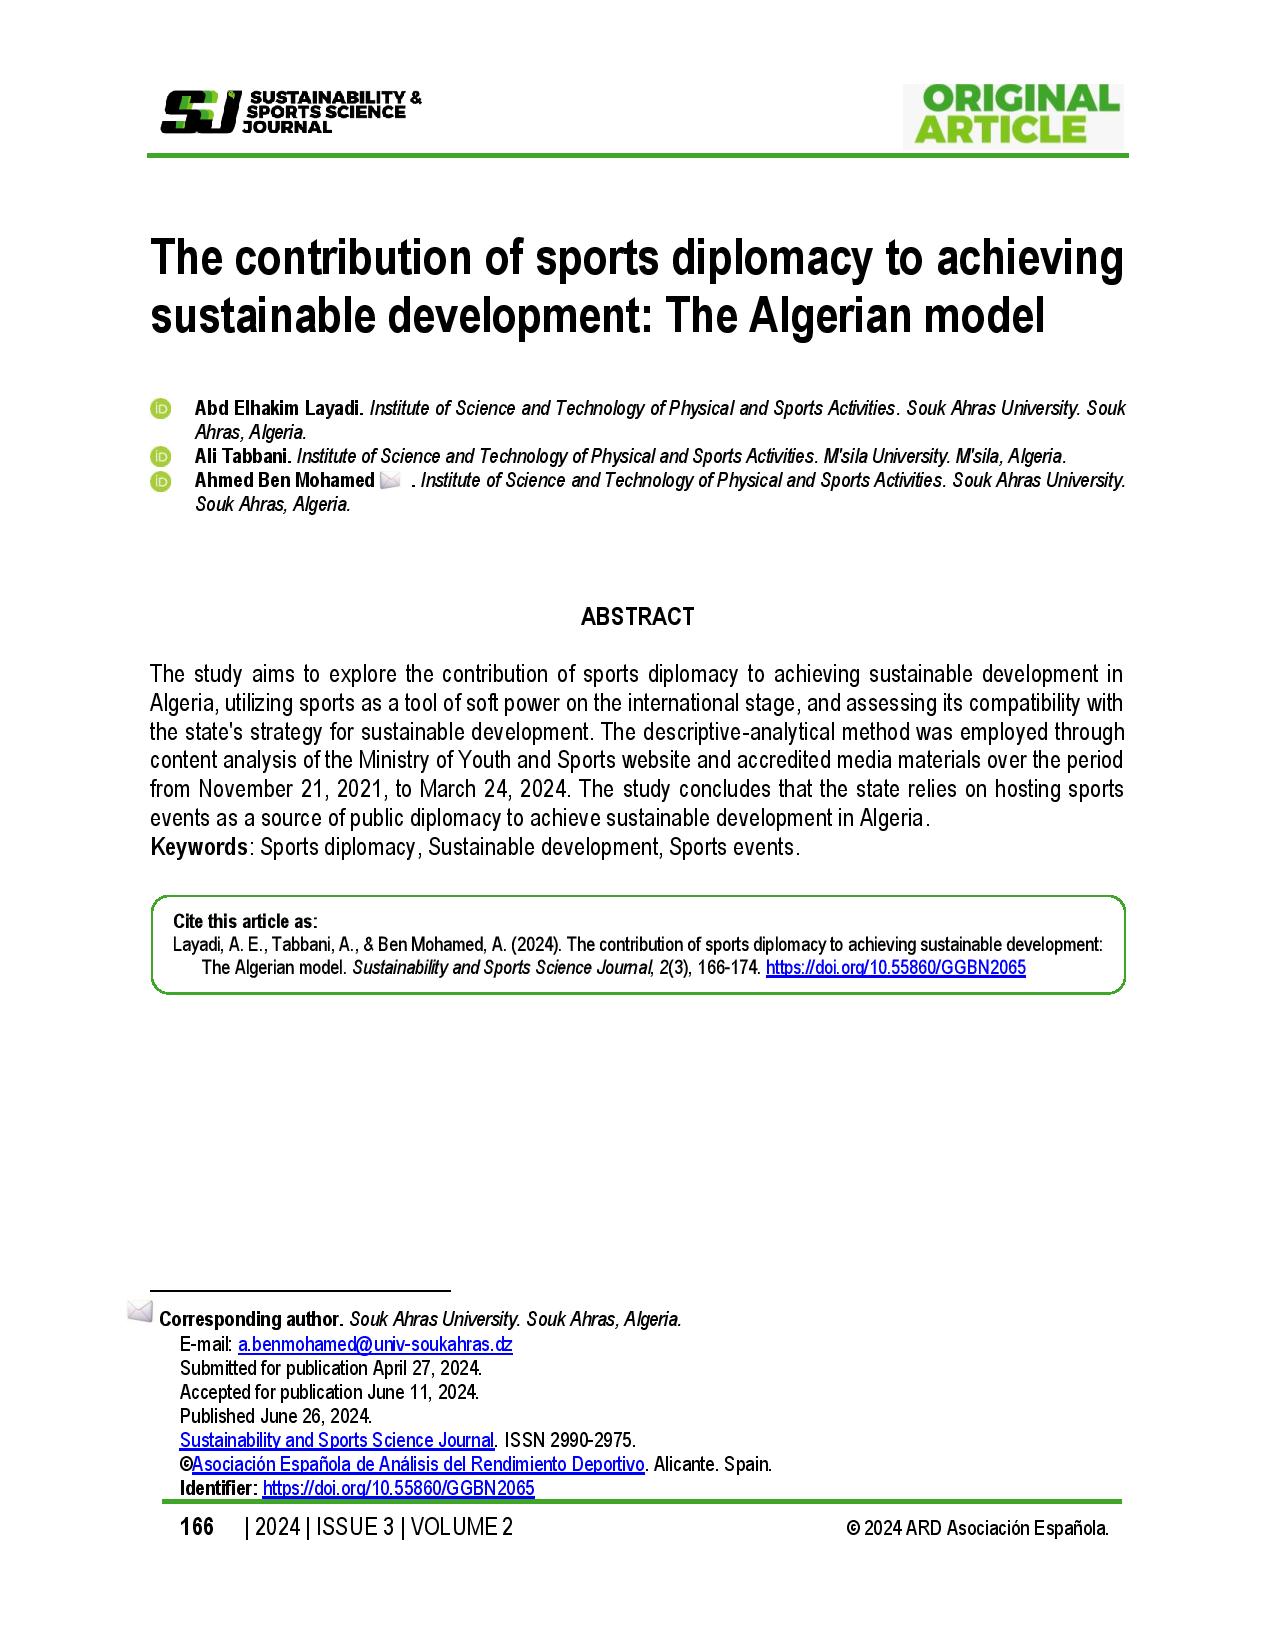 The contribution of sports diplomacy to achieving sustainable development: The Algerian model